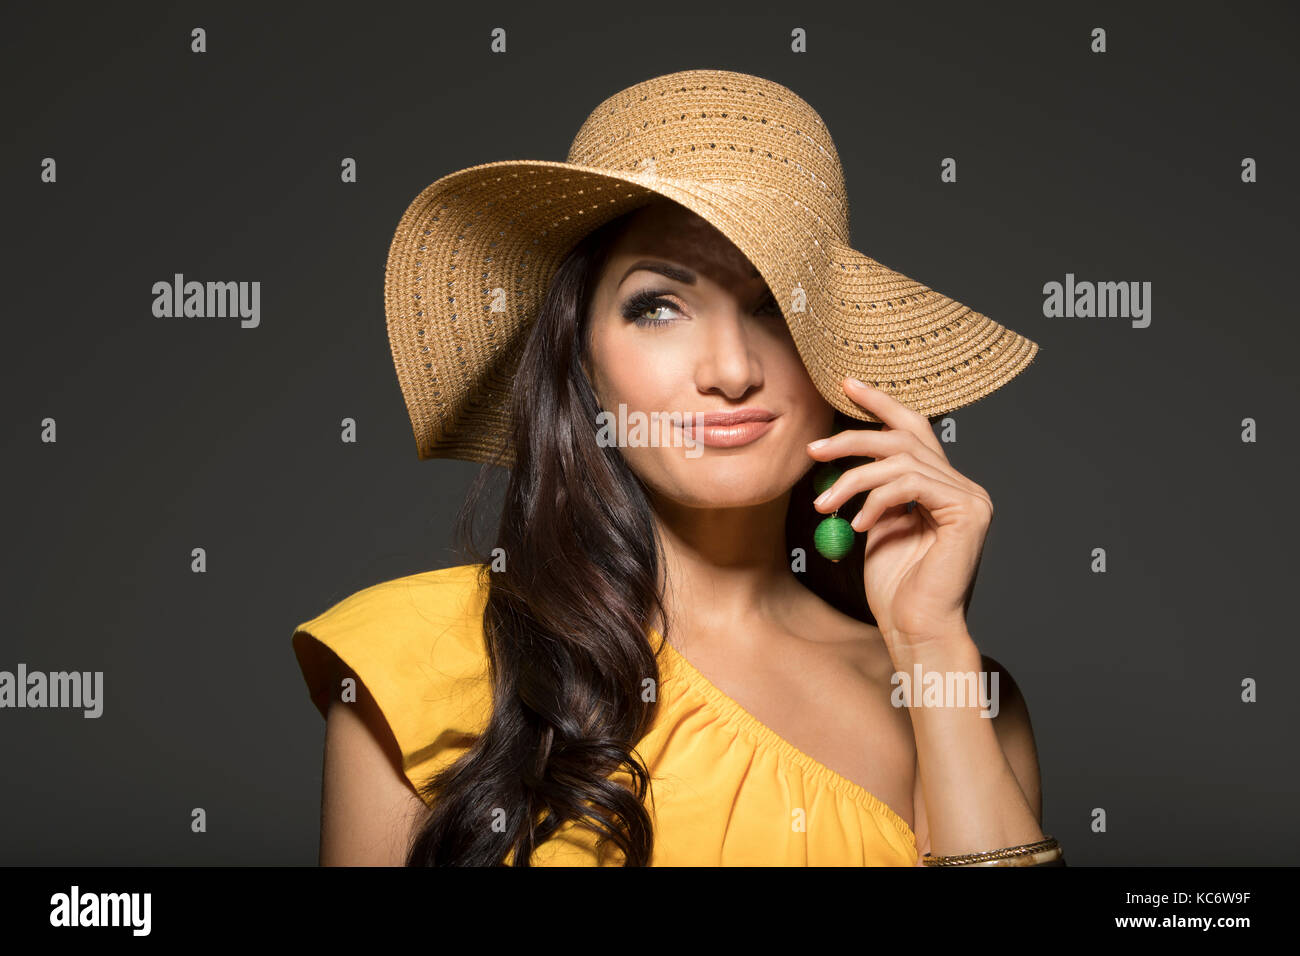 Portrait of woman wearing straw hat and yellow top Stock Photo